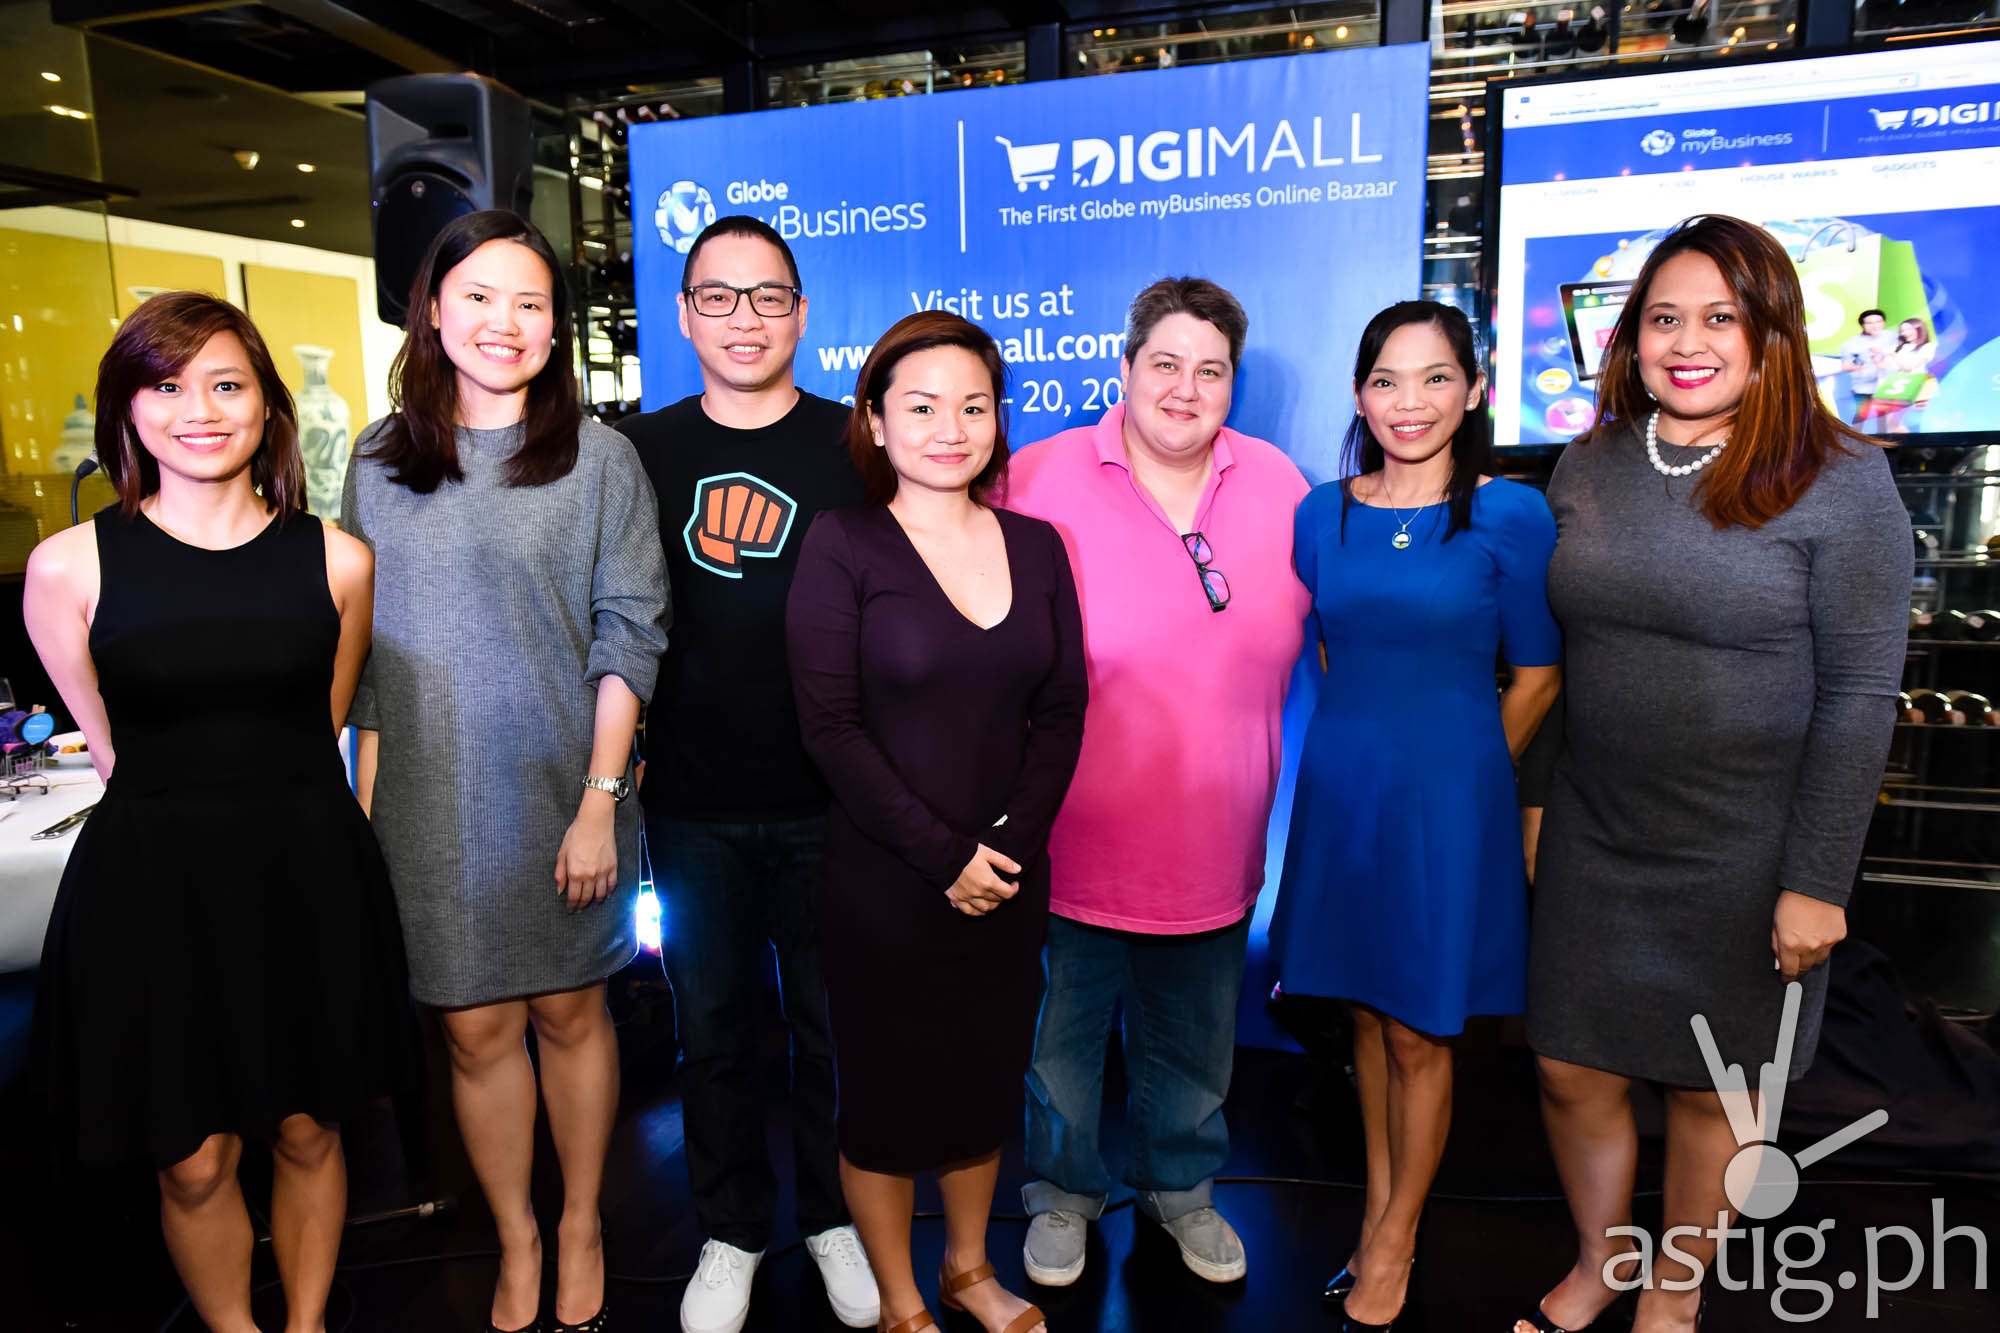 Globe myBusiness announced the first ever online bazaar featuring over 25 Filipino Shopify merchants. Some of the Shopify merchants also joined the launch with a preview of their sample products for everyone to enjoy. At the launch were (From L-R) Globe myBusiness Solutions Expert Dani Gil, Head of Retail Solutions Stephanie Chua, Shopify Merchants: YouPoundIt’s Kristian Salvo, Renegade Folk’s Regina Sambalino and Cake Shots’ Patricia Blardony, Globe myBusiness VP for Marketing Barbie Dapul and Globe myBusiness VP for Digital and Customer Experience Debbie Obias